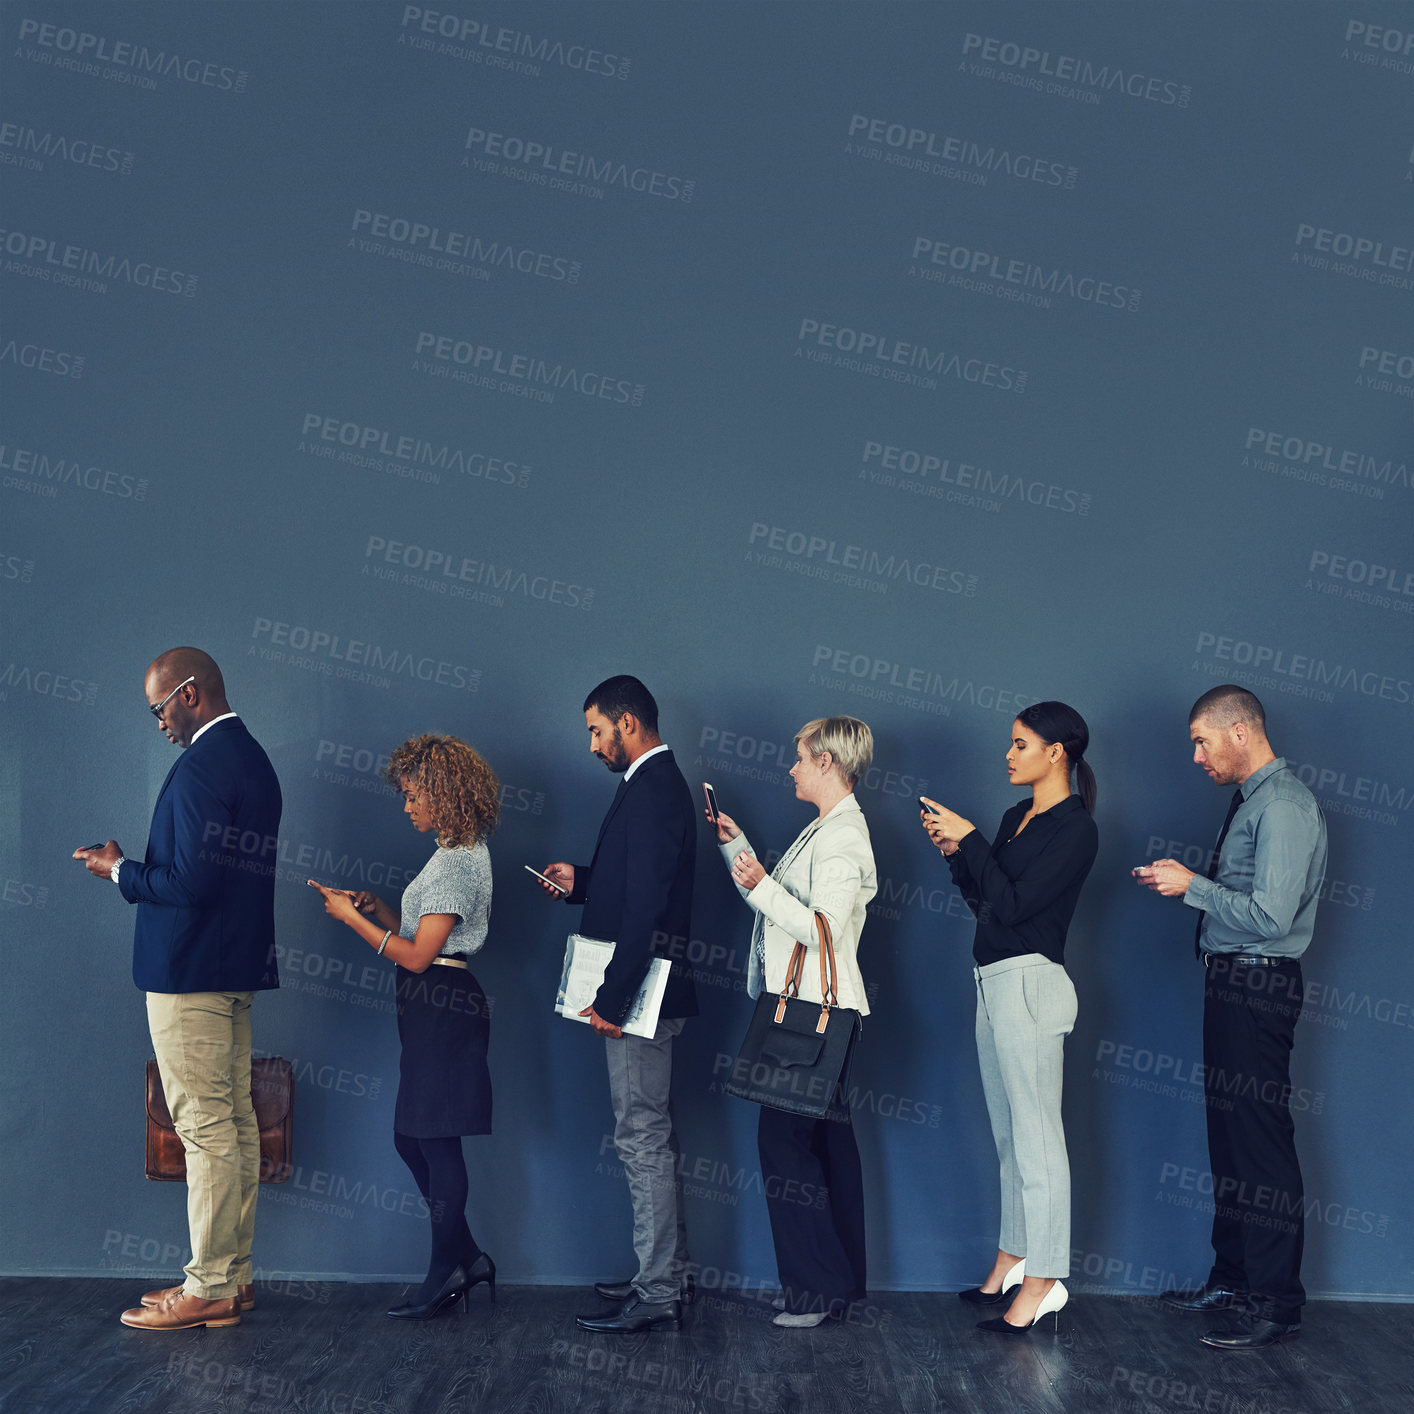 Buy stock photo Studio shot of a group of businesspeople using wireless devices while waiting in line